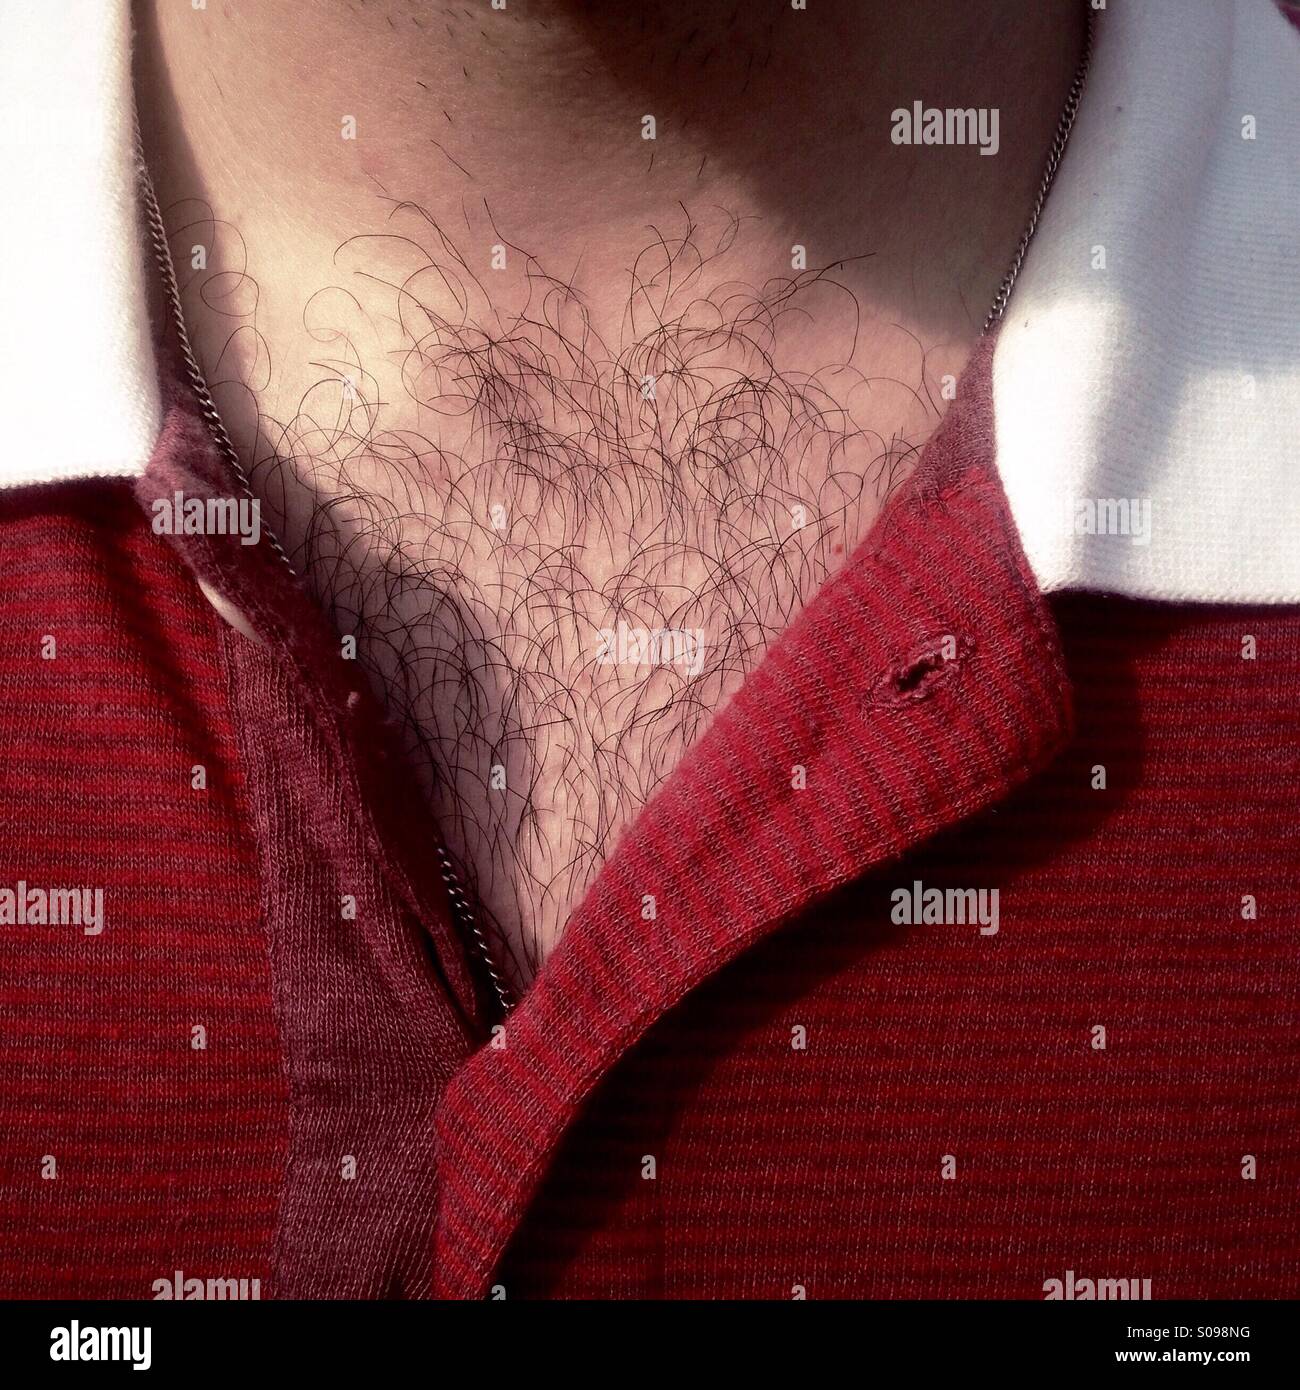 Detail of a hairy chest and red shirt Stock Photo